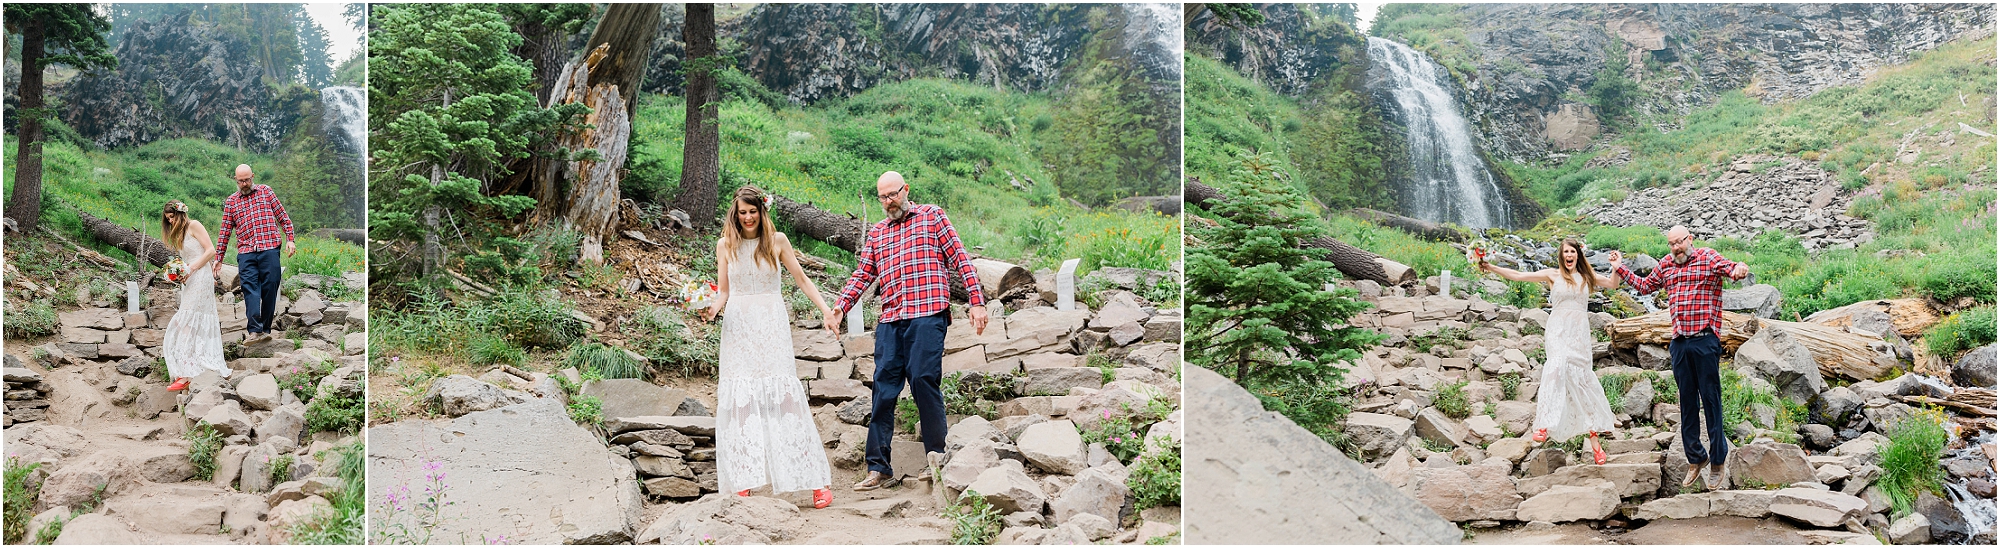 A celebratory jump for this couple as they just eloped at Crater Lake! | Erica Swantek Photography